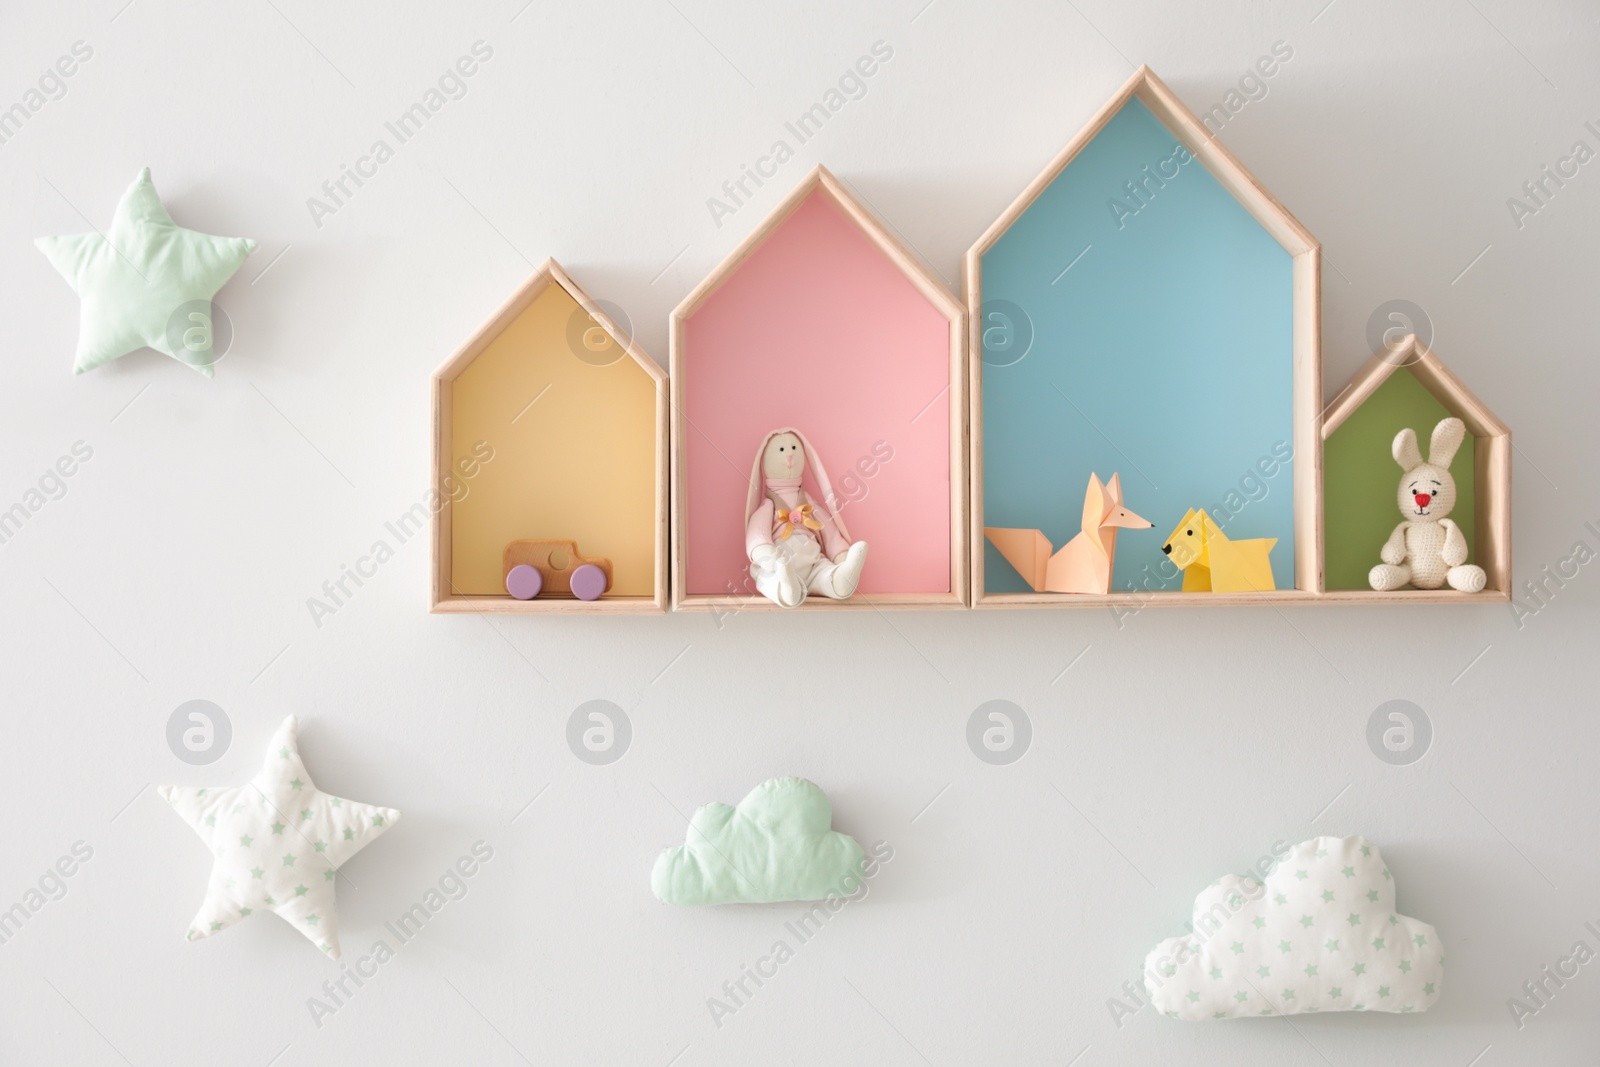 Photo of Different house shaped shelves with toys and decorative clouds on white wall. Interior design